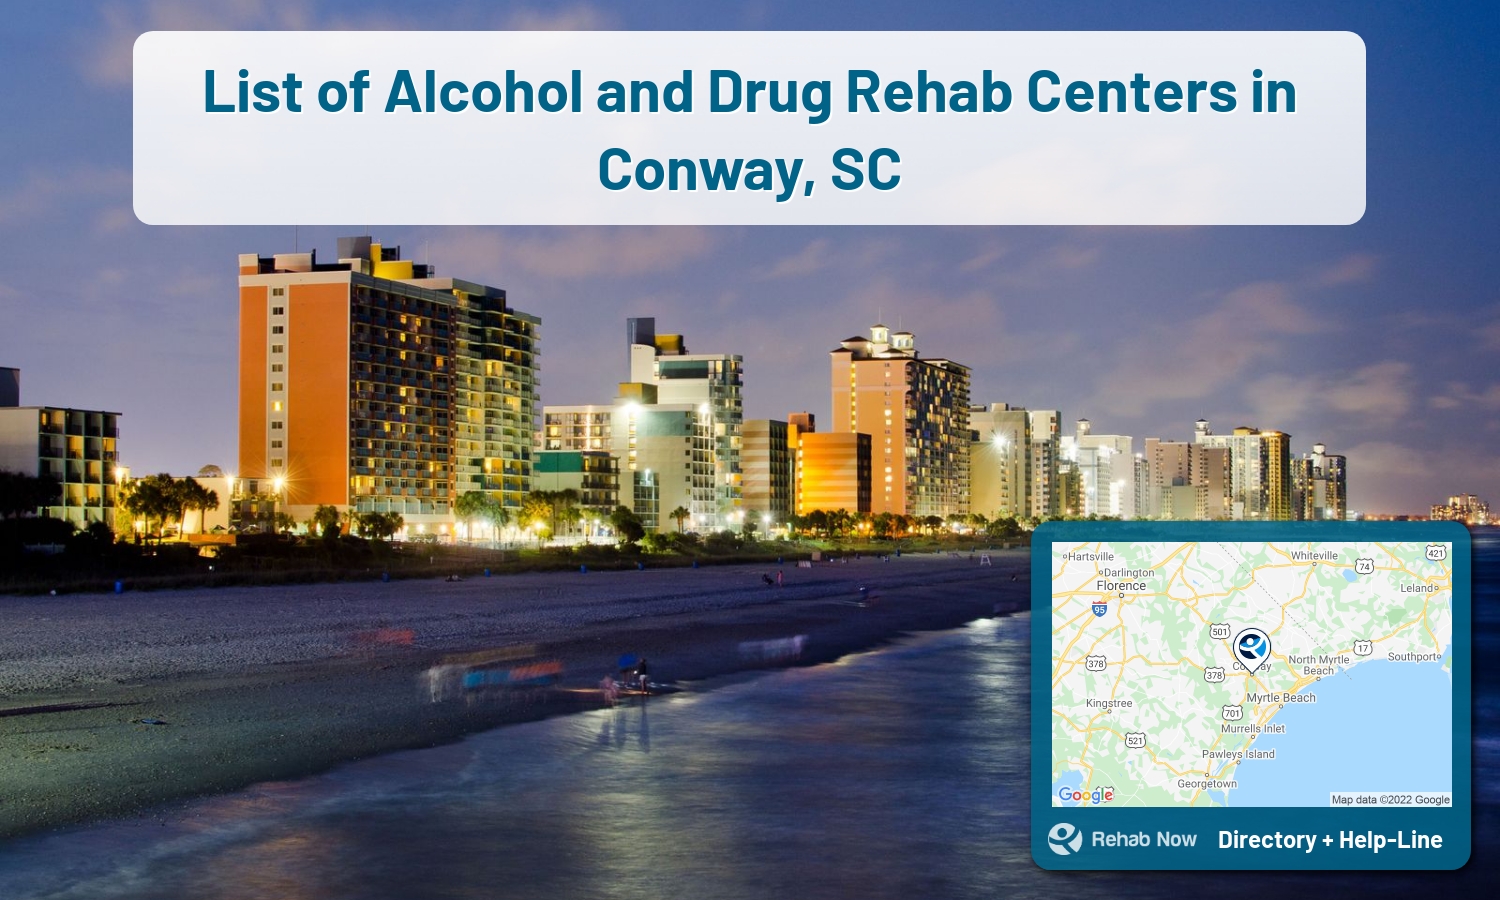 List of alcohol and drug treatment centers near you in Conway, South Carolina. Research certifications, programs, methods, pricing, and more.